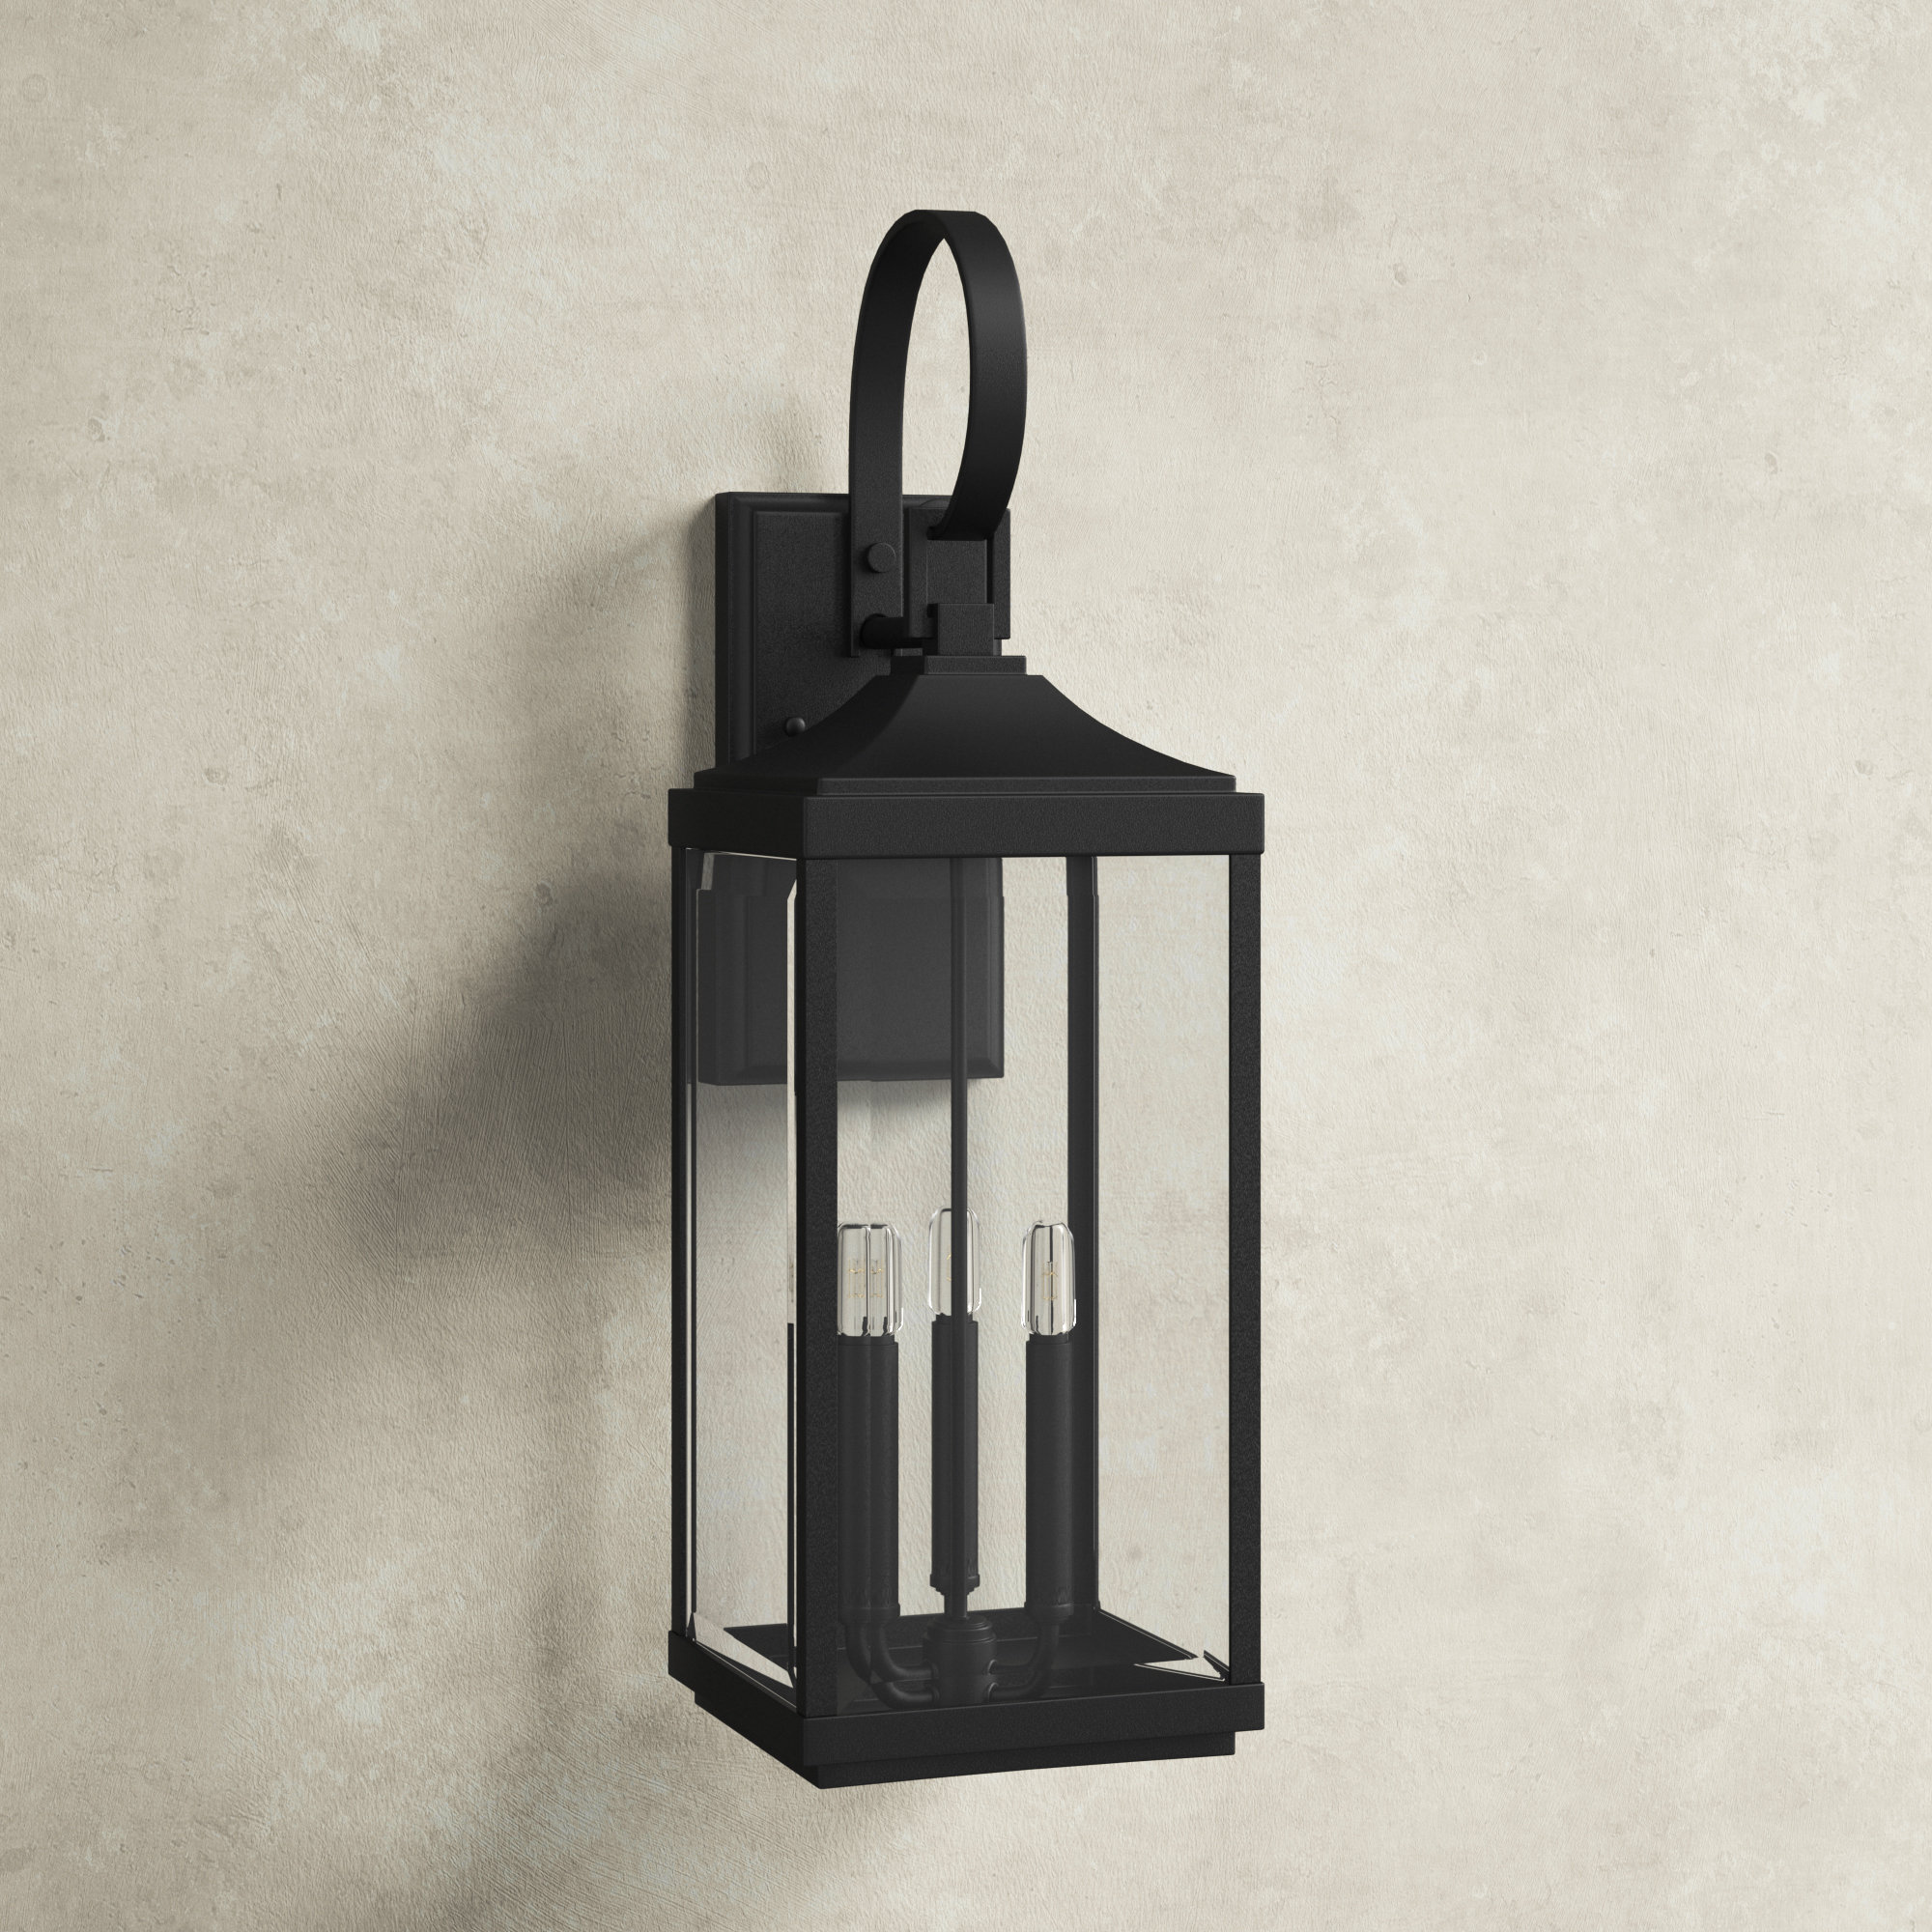 Modern Black Single Light Cone-Shaped Lantern Metal Indoor/Outdoor Wall Sconce 